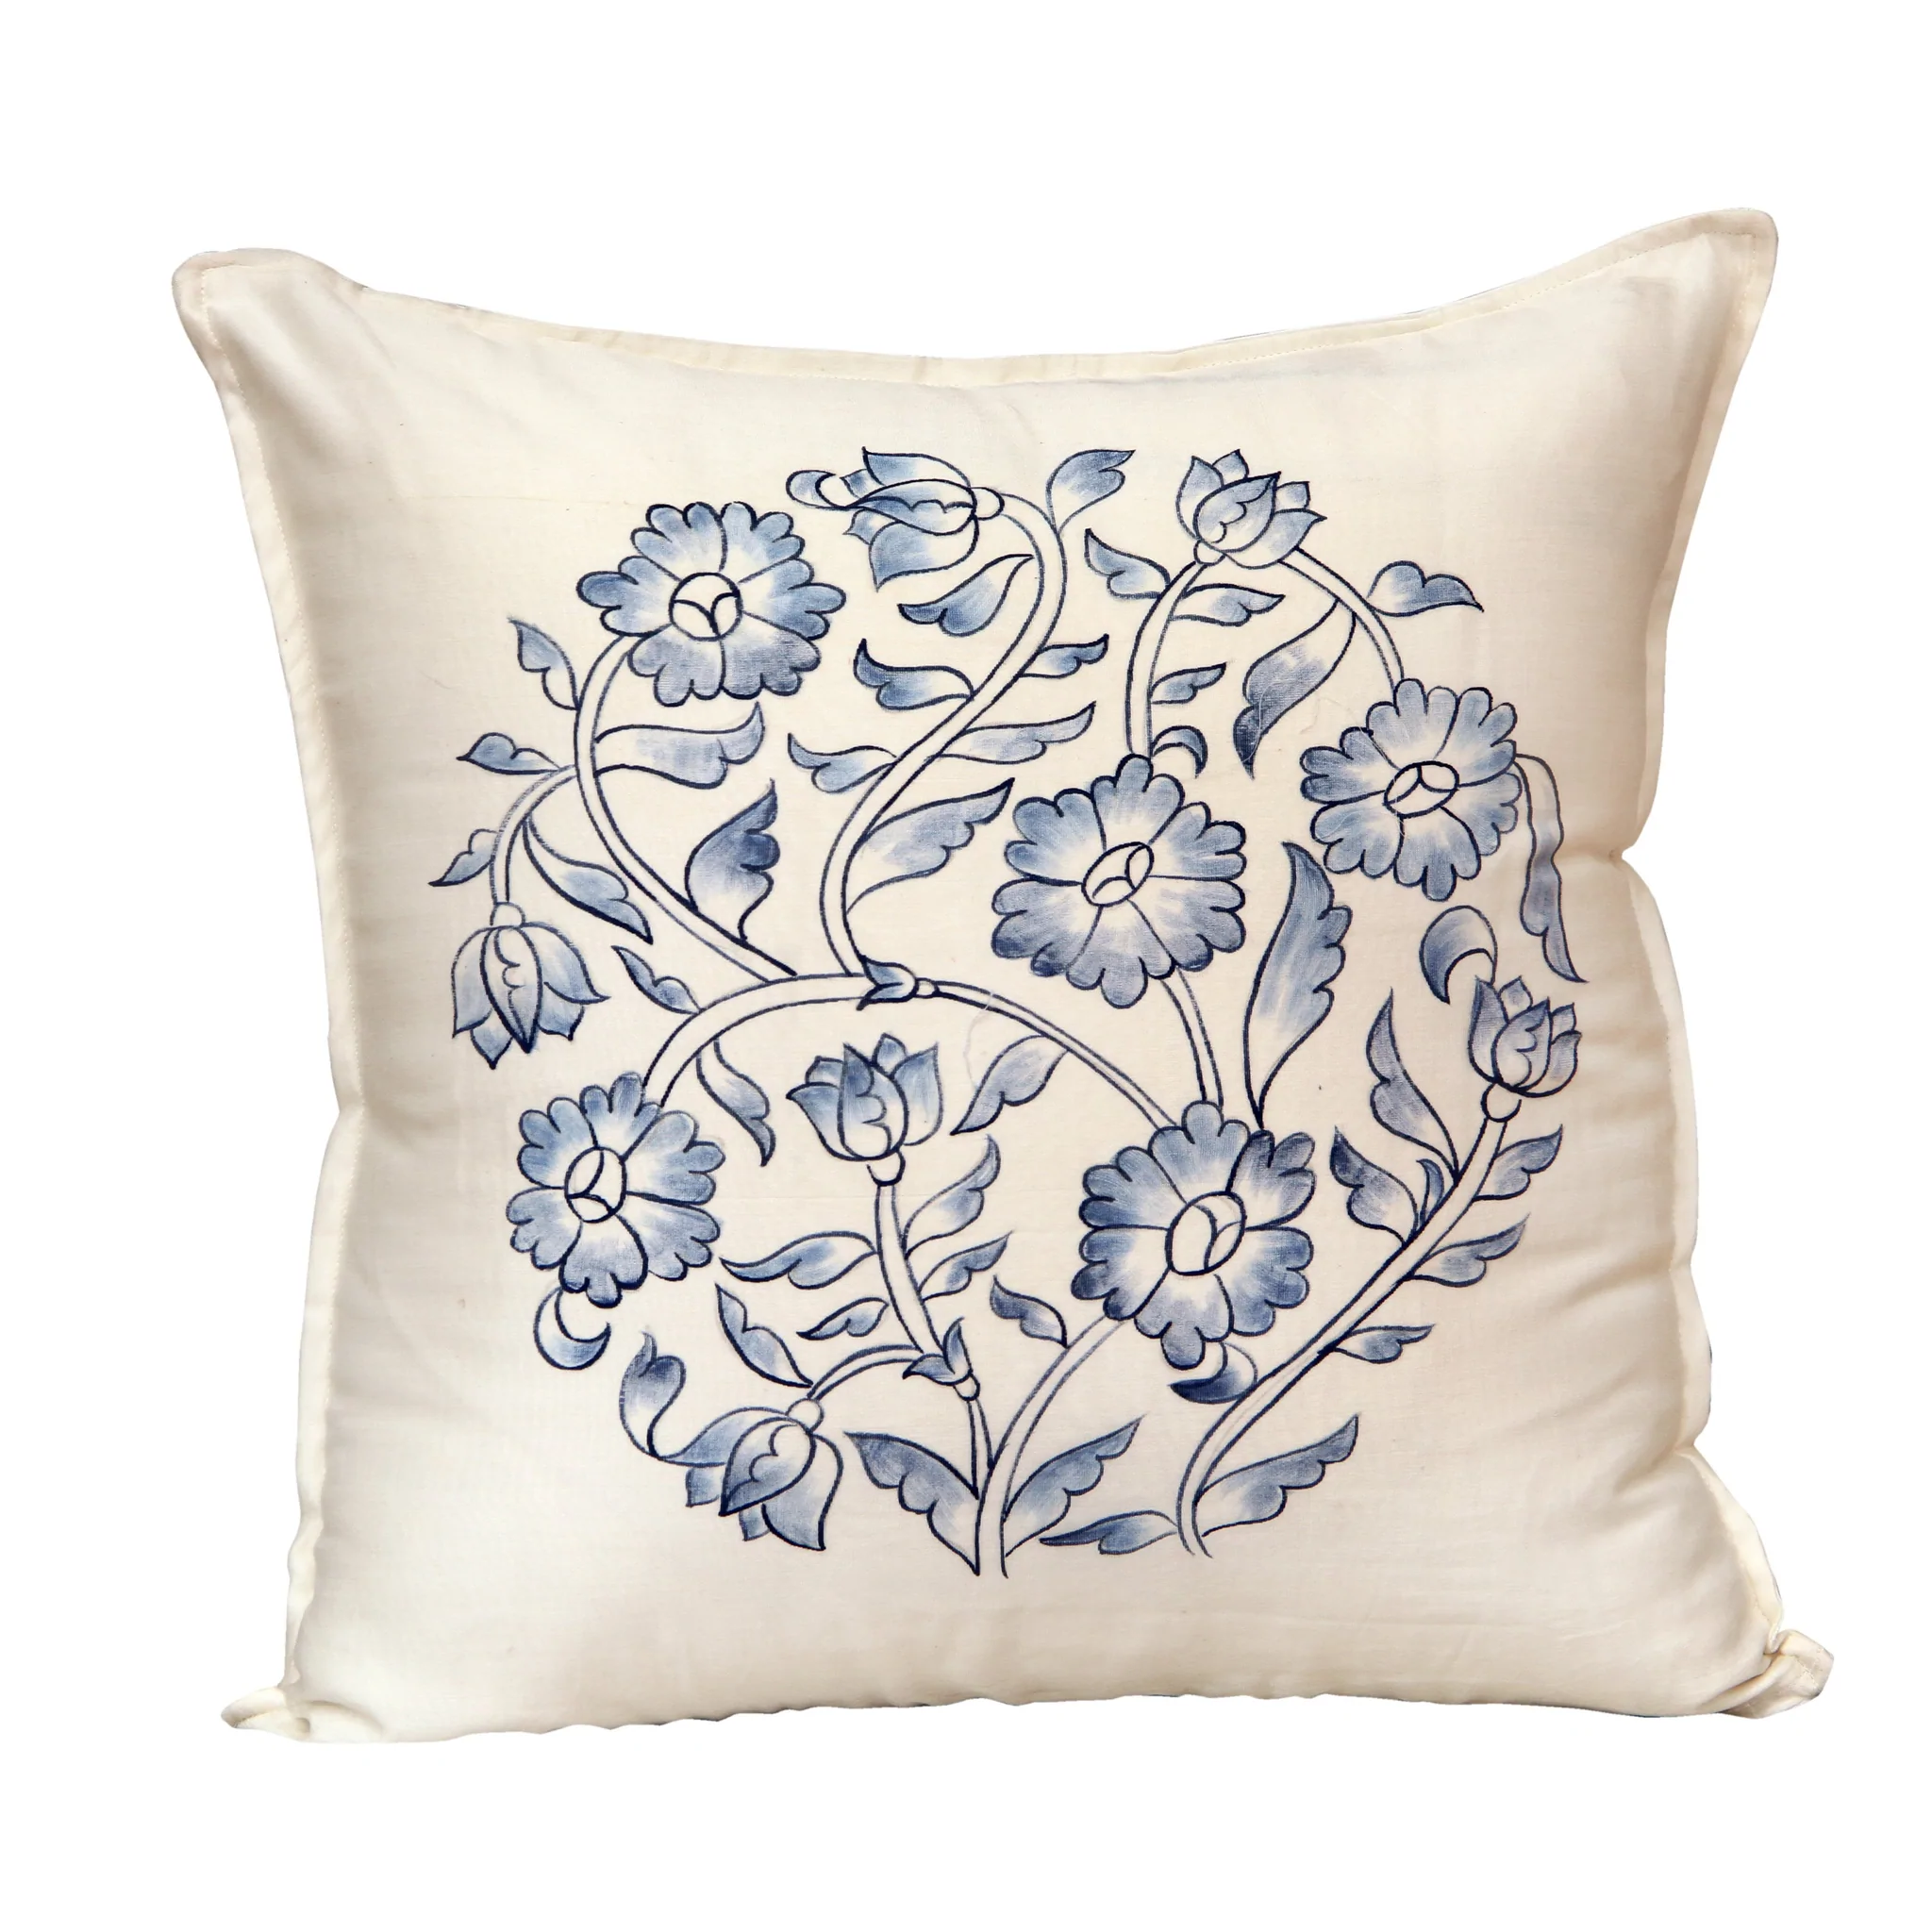 Handpainted Pottery Theme Cushion Cover 1024×1024@2x